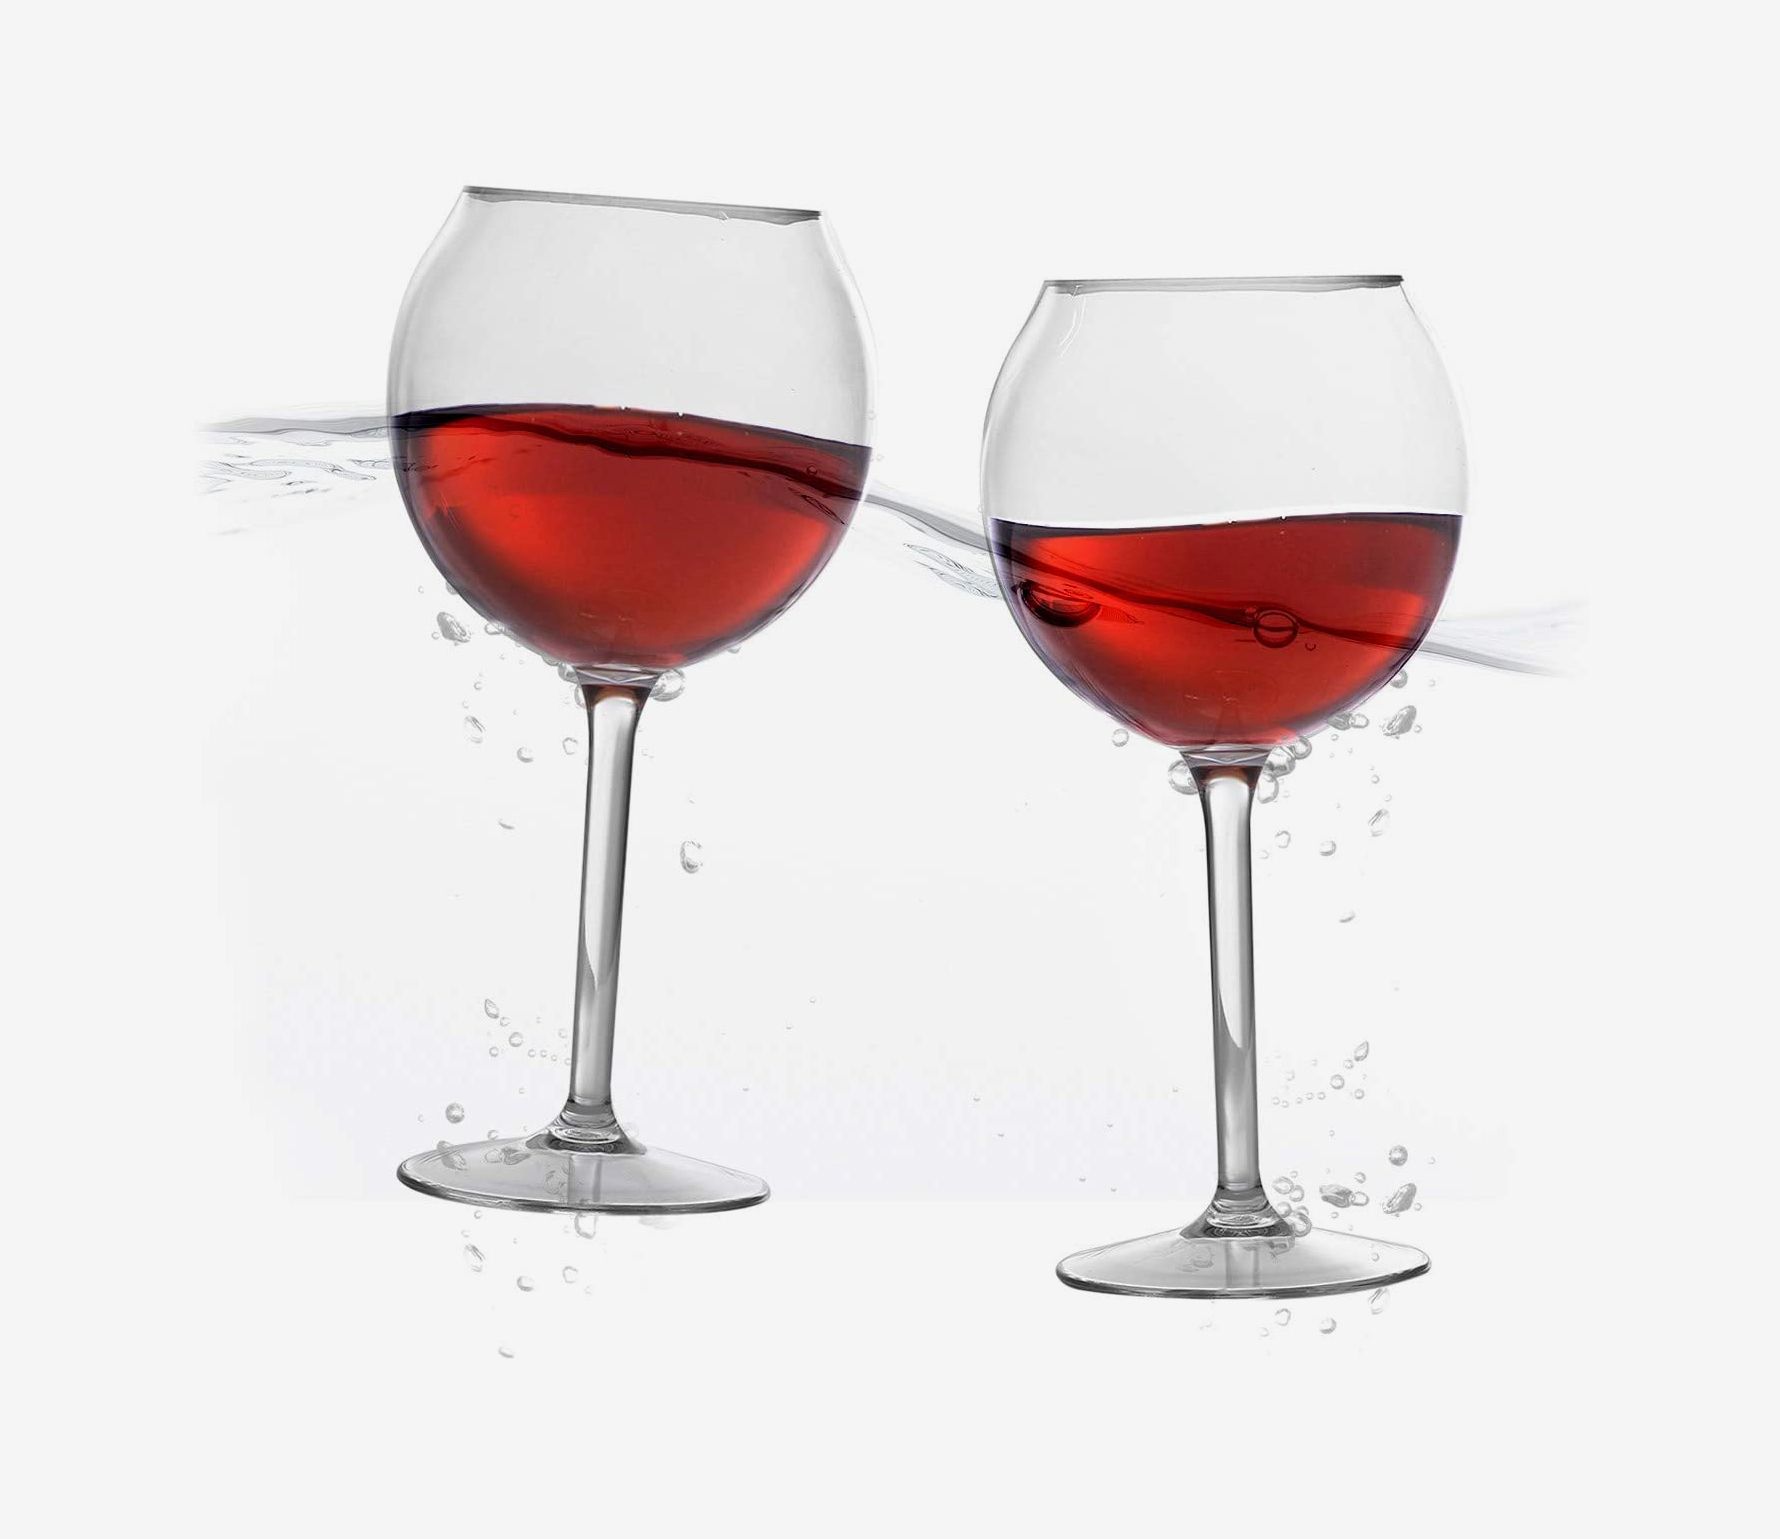 Best Red Wine Glasses, According To Best-Selling Glassware For 2023